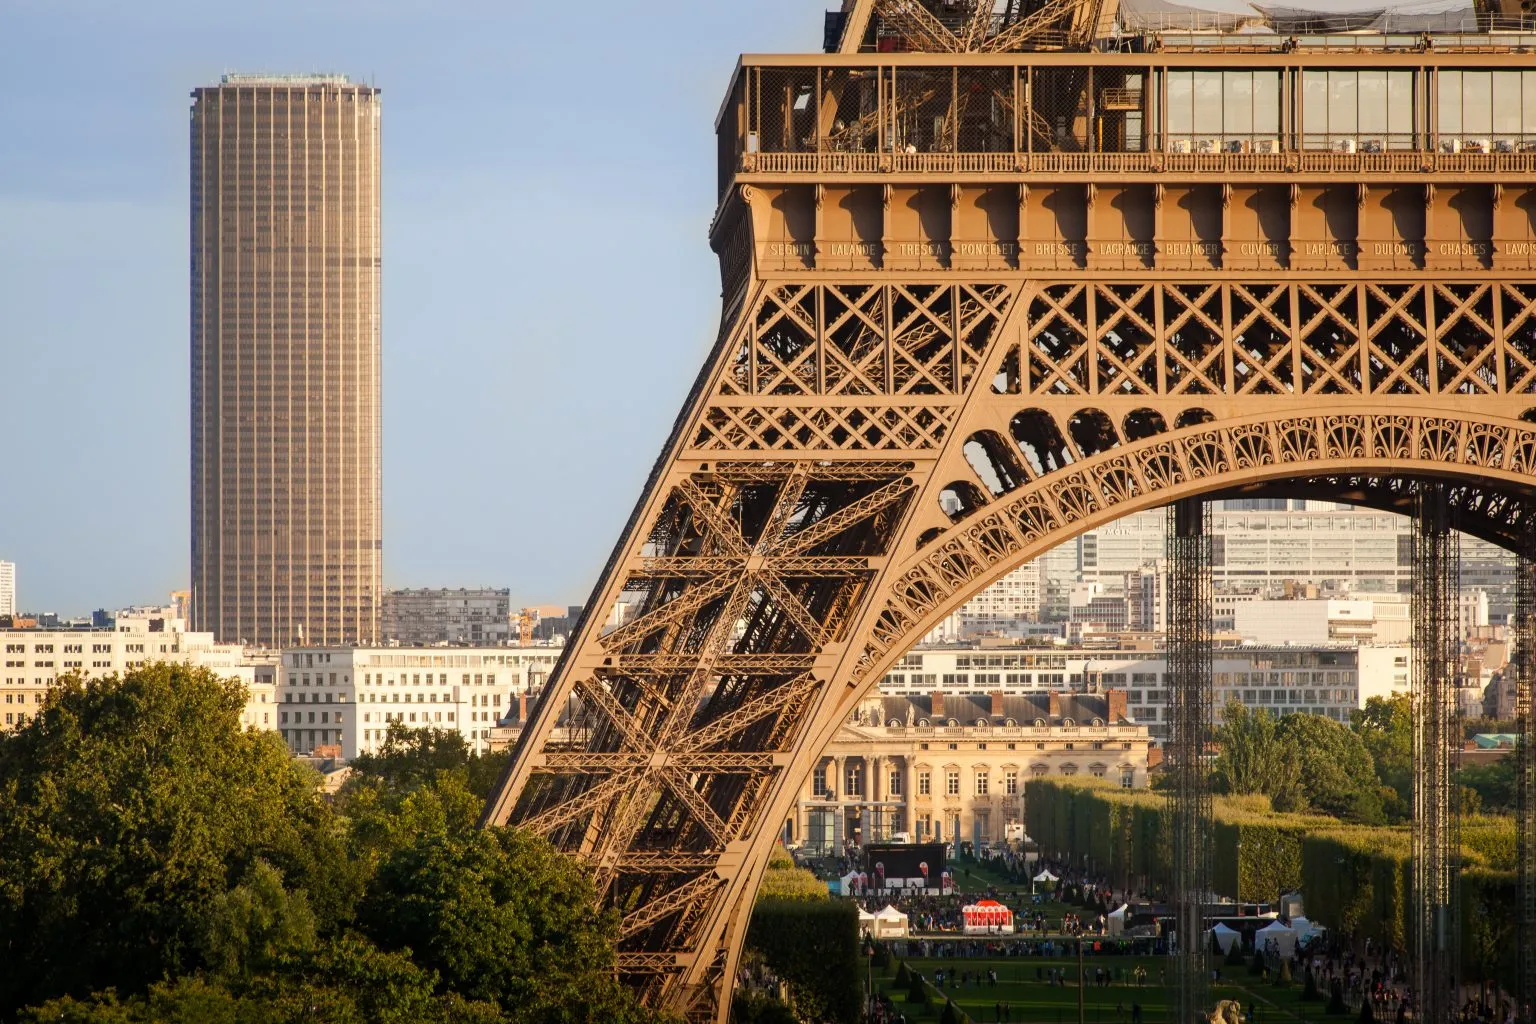 what is tour montparnasse used for